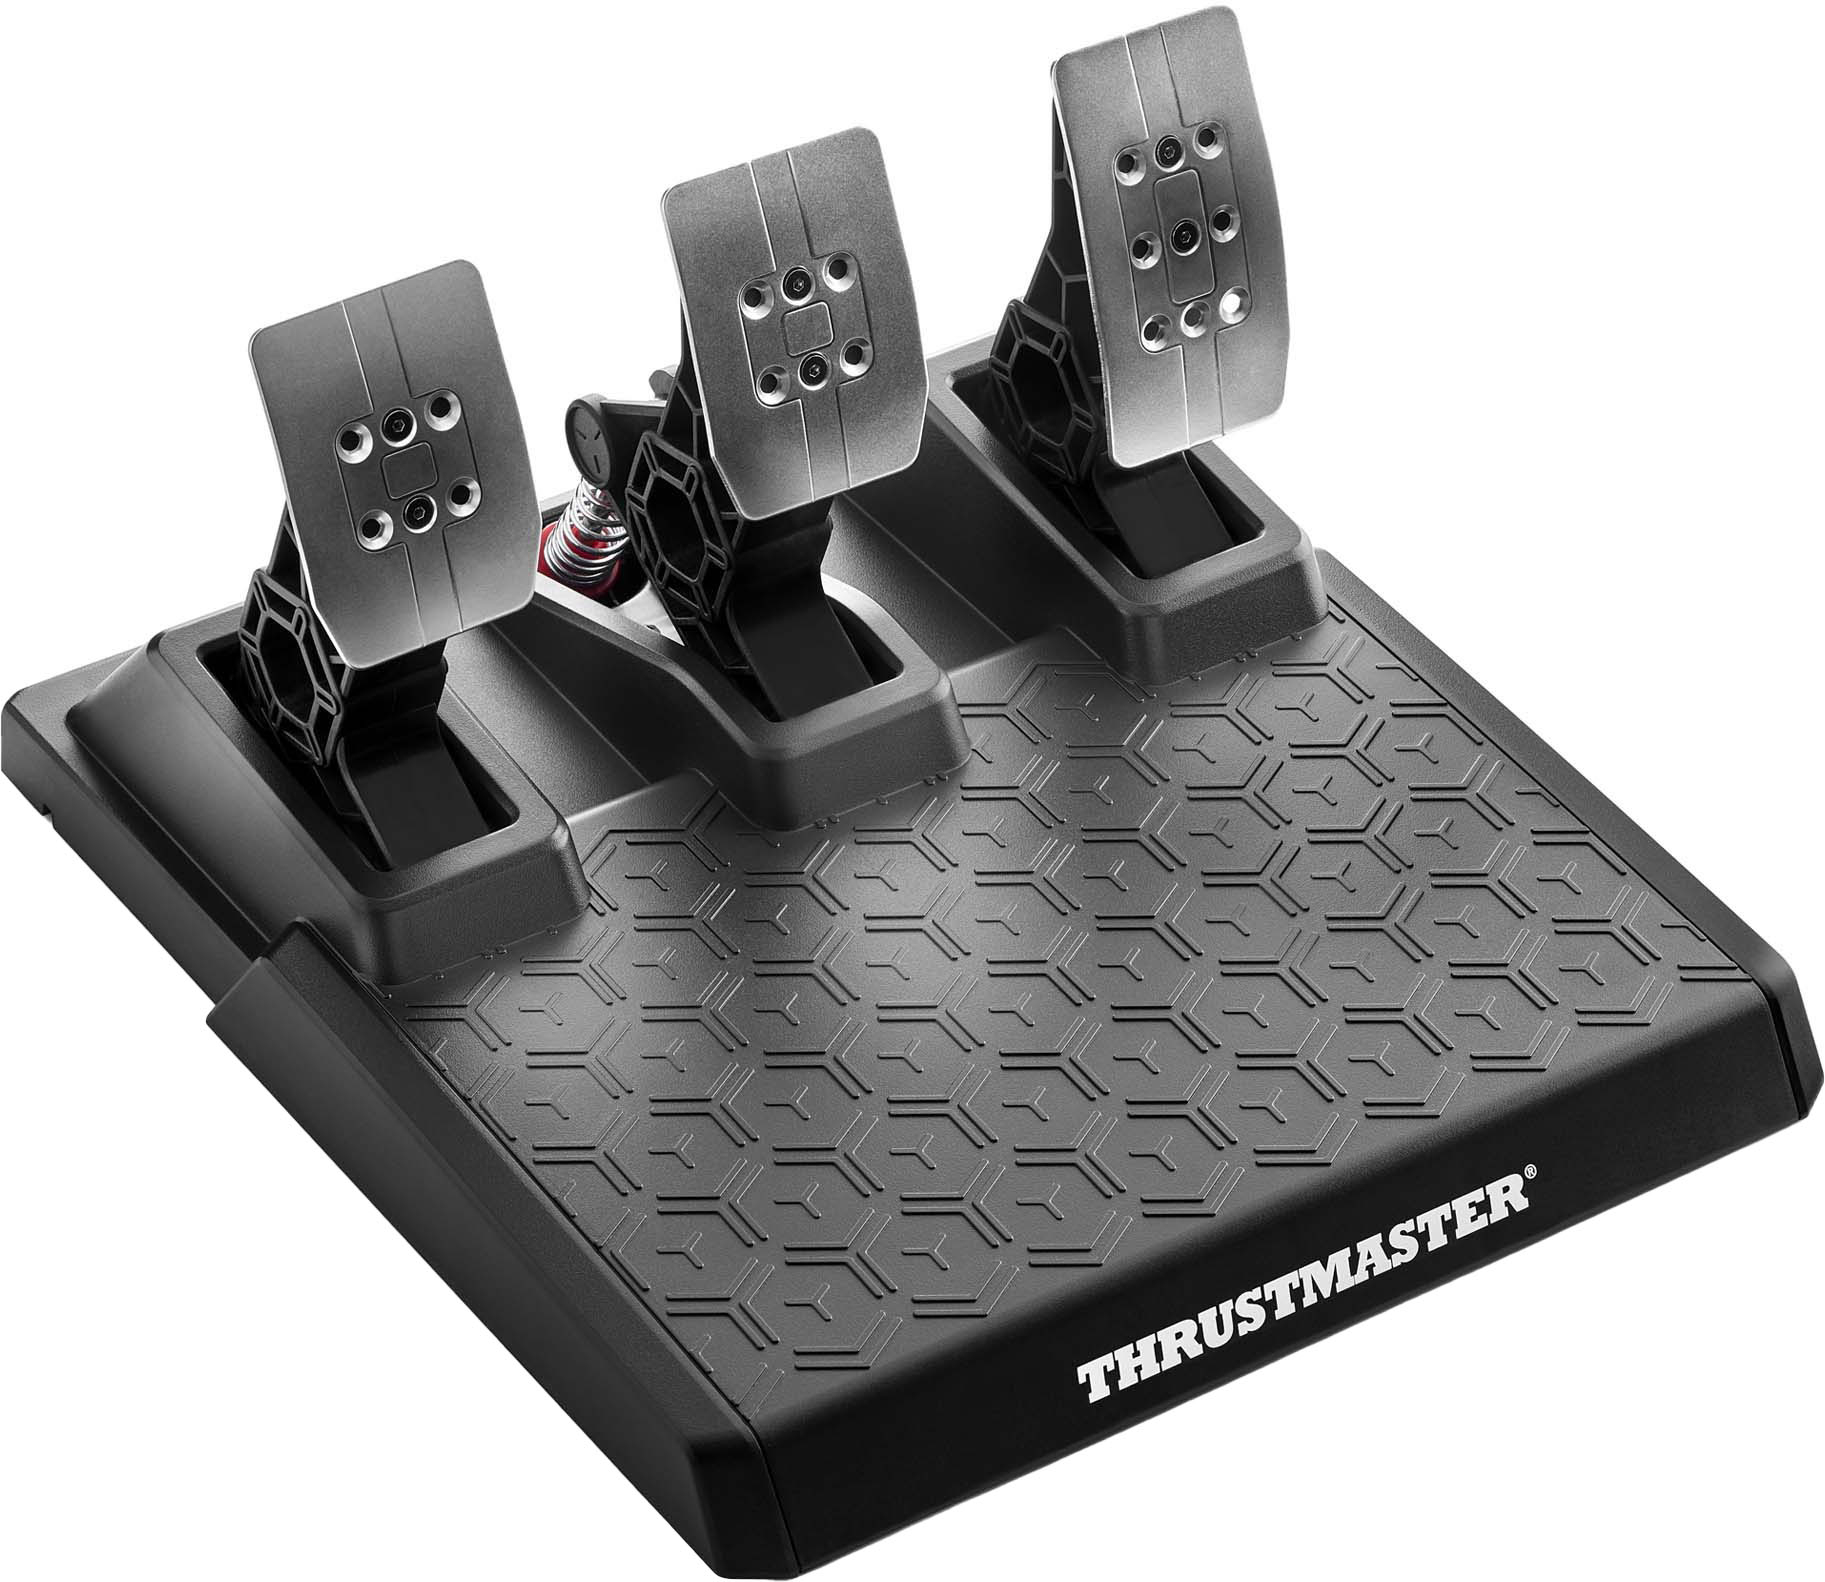 Thrustmaster T248 Racing Wheel and Magnetic Pedals for PS5, PS4